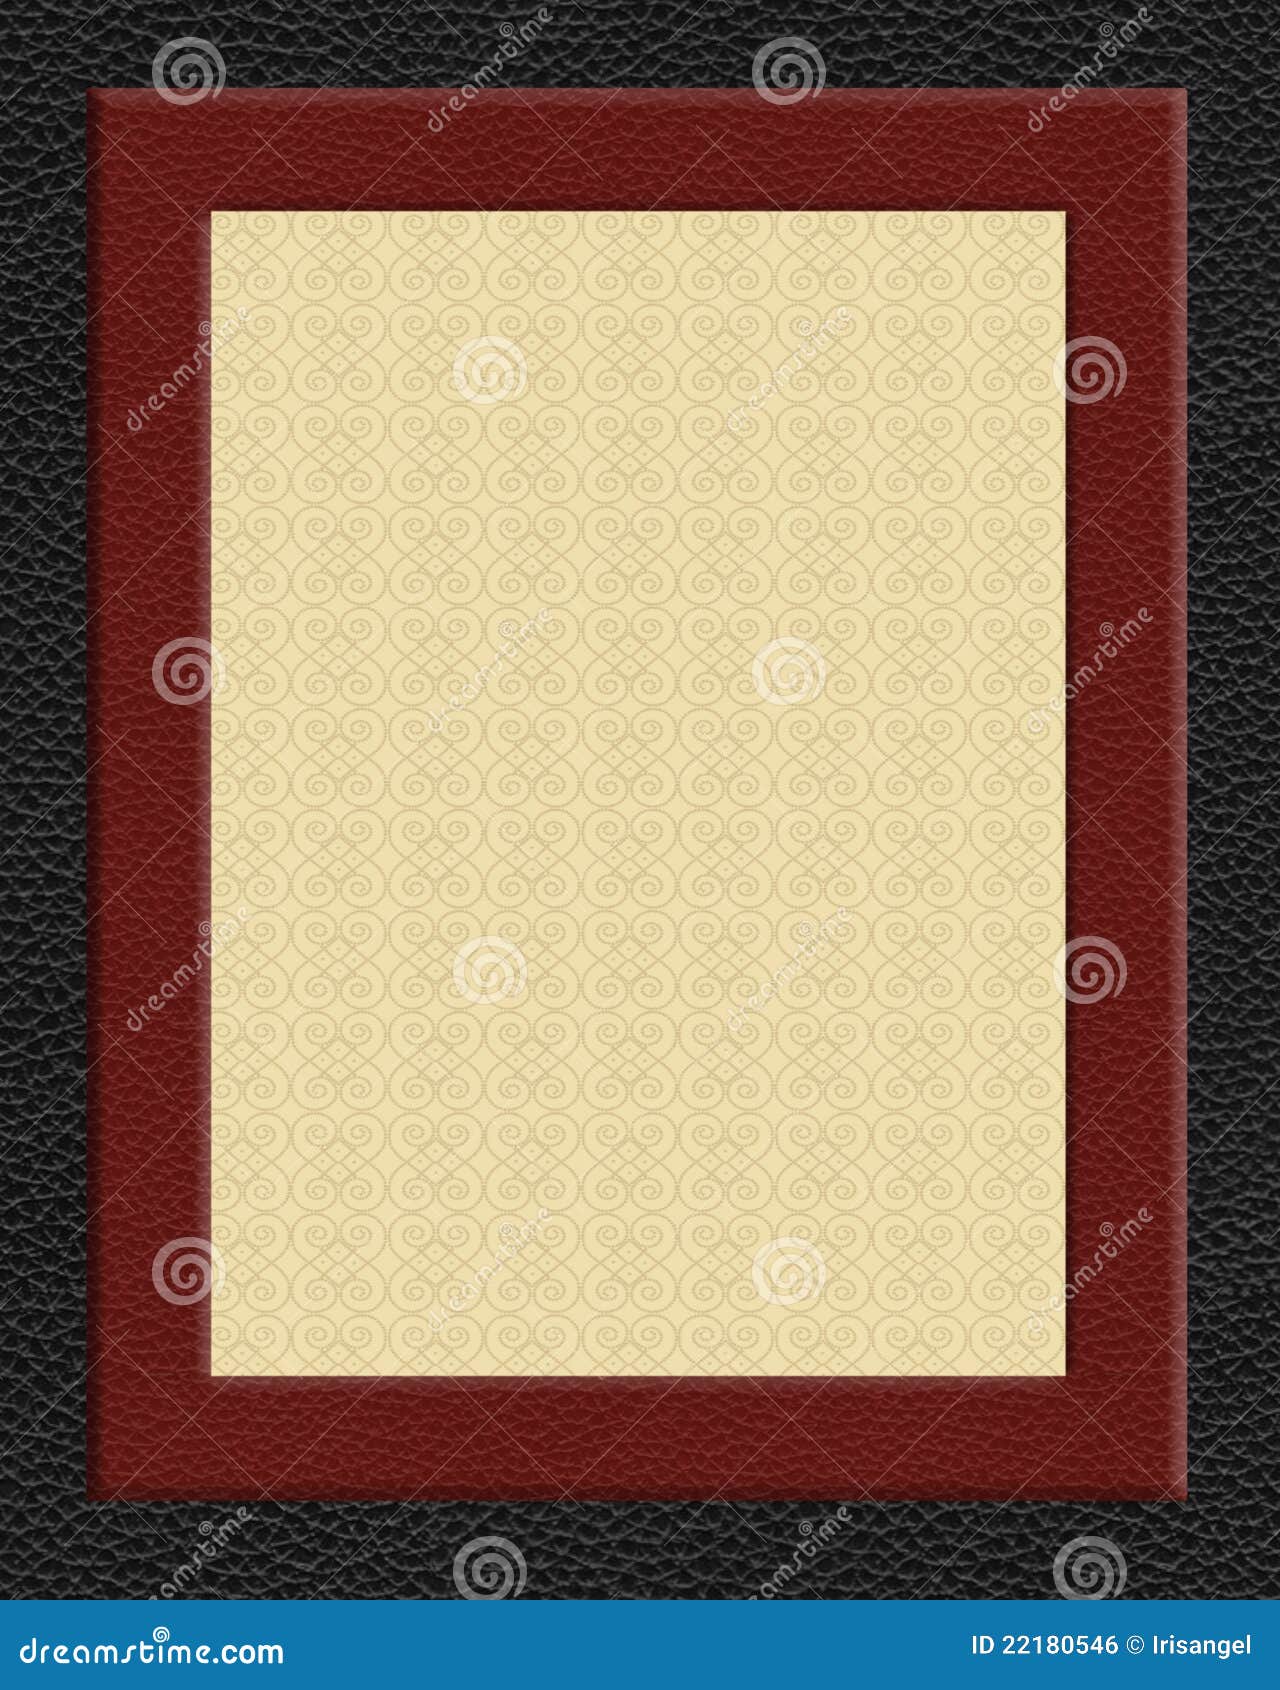 leather look frame background